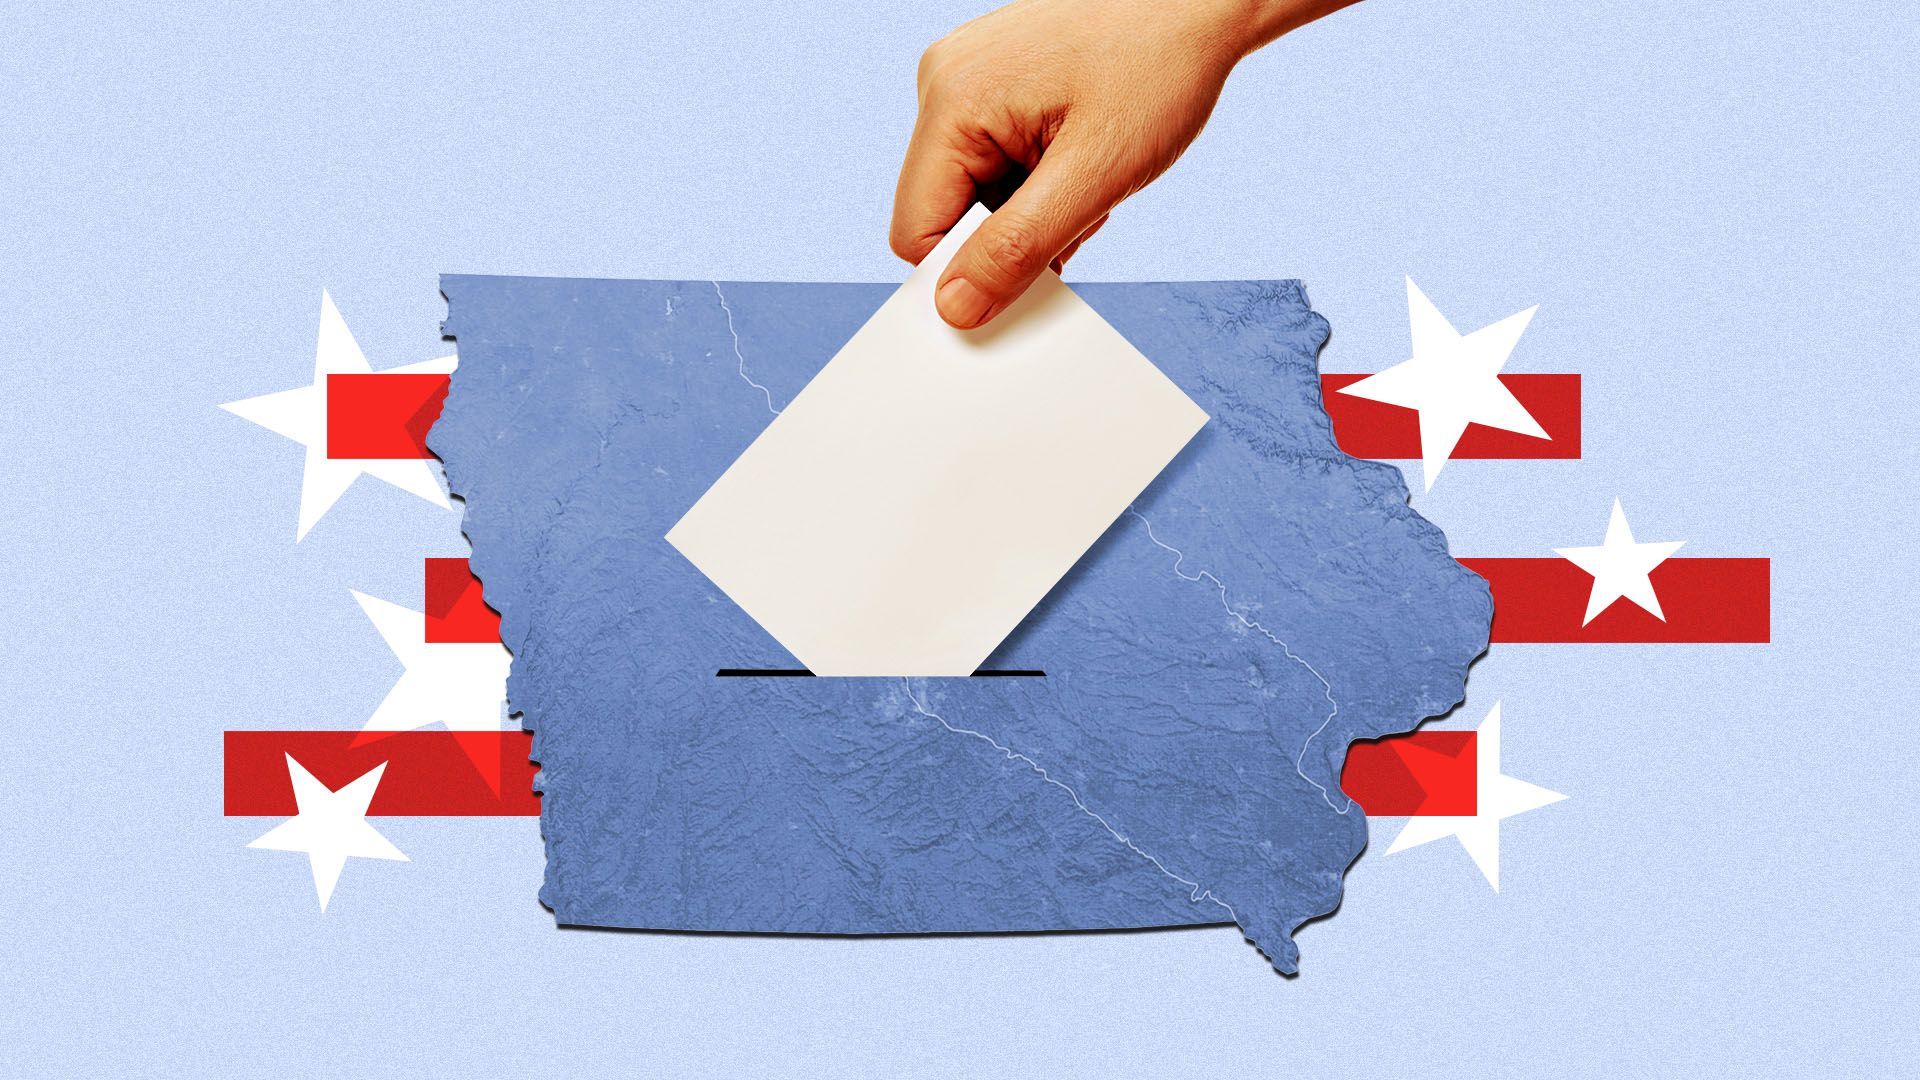 Illustration of the state of Iowa with a hand submitting a ballot and stars and stripes